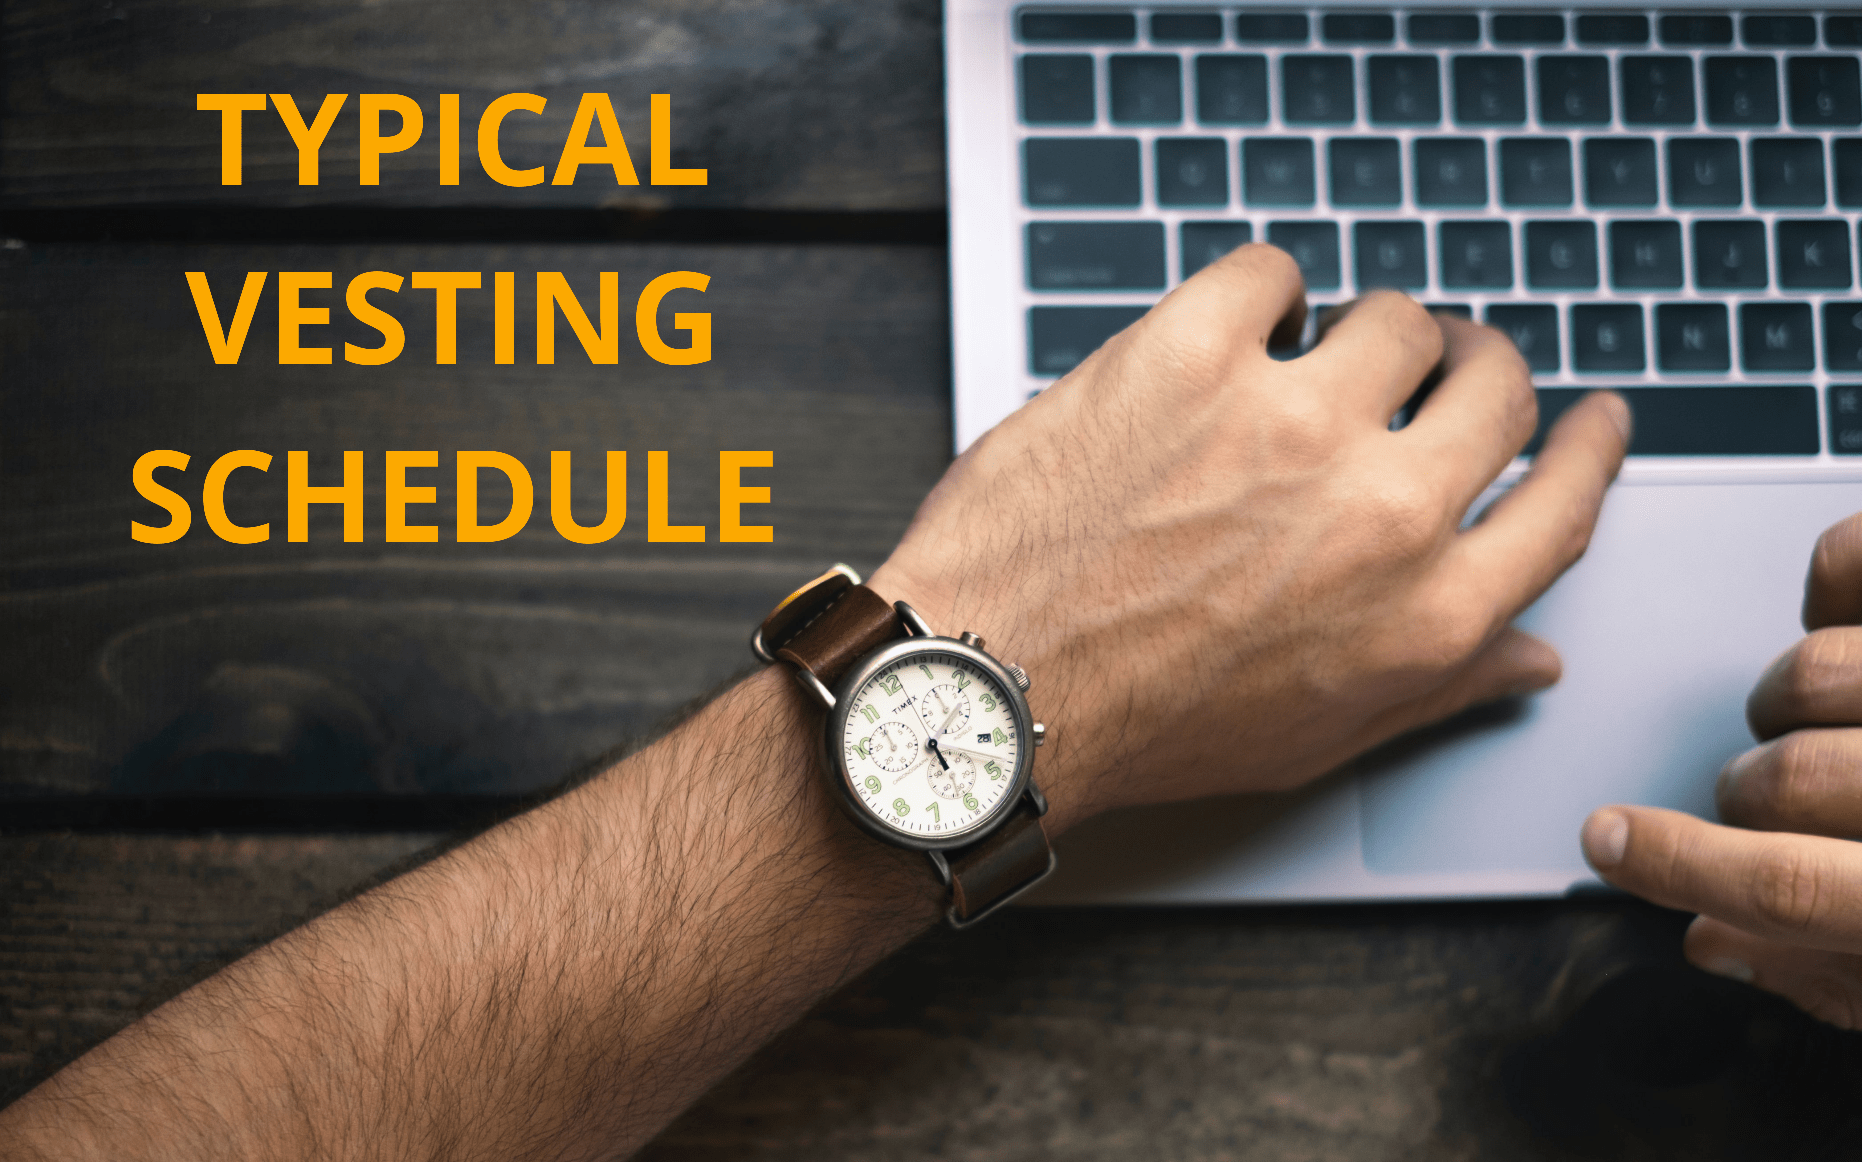 What is a typical vesting schedule, typical vesting schedule for startups, typical vesting schedule for founders, typical vesting schedule 401k, typical vesting schedule